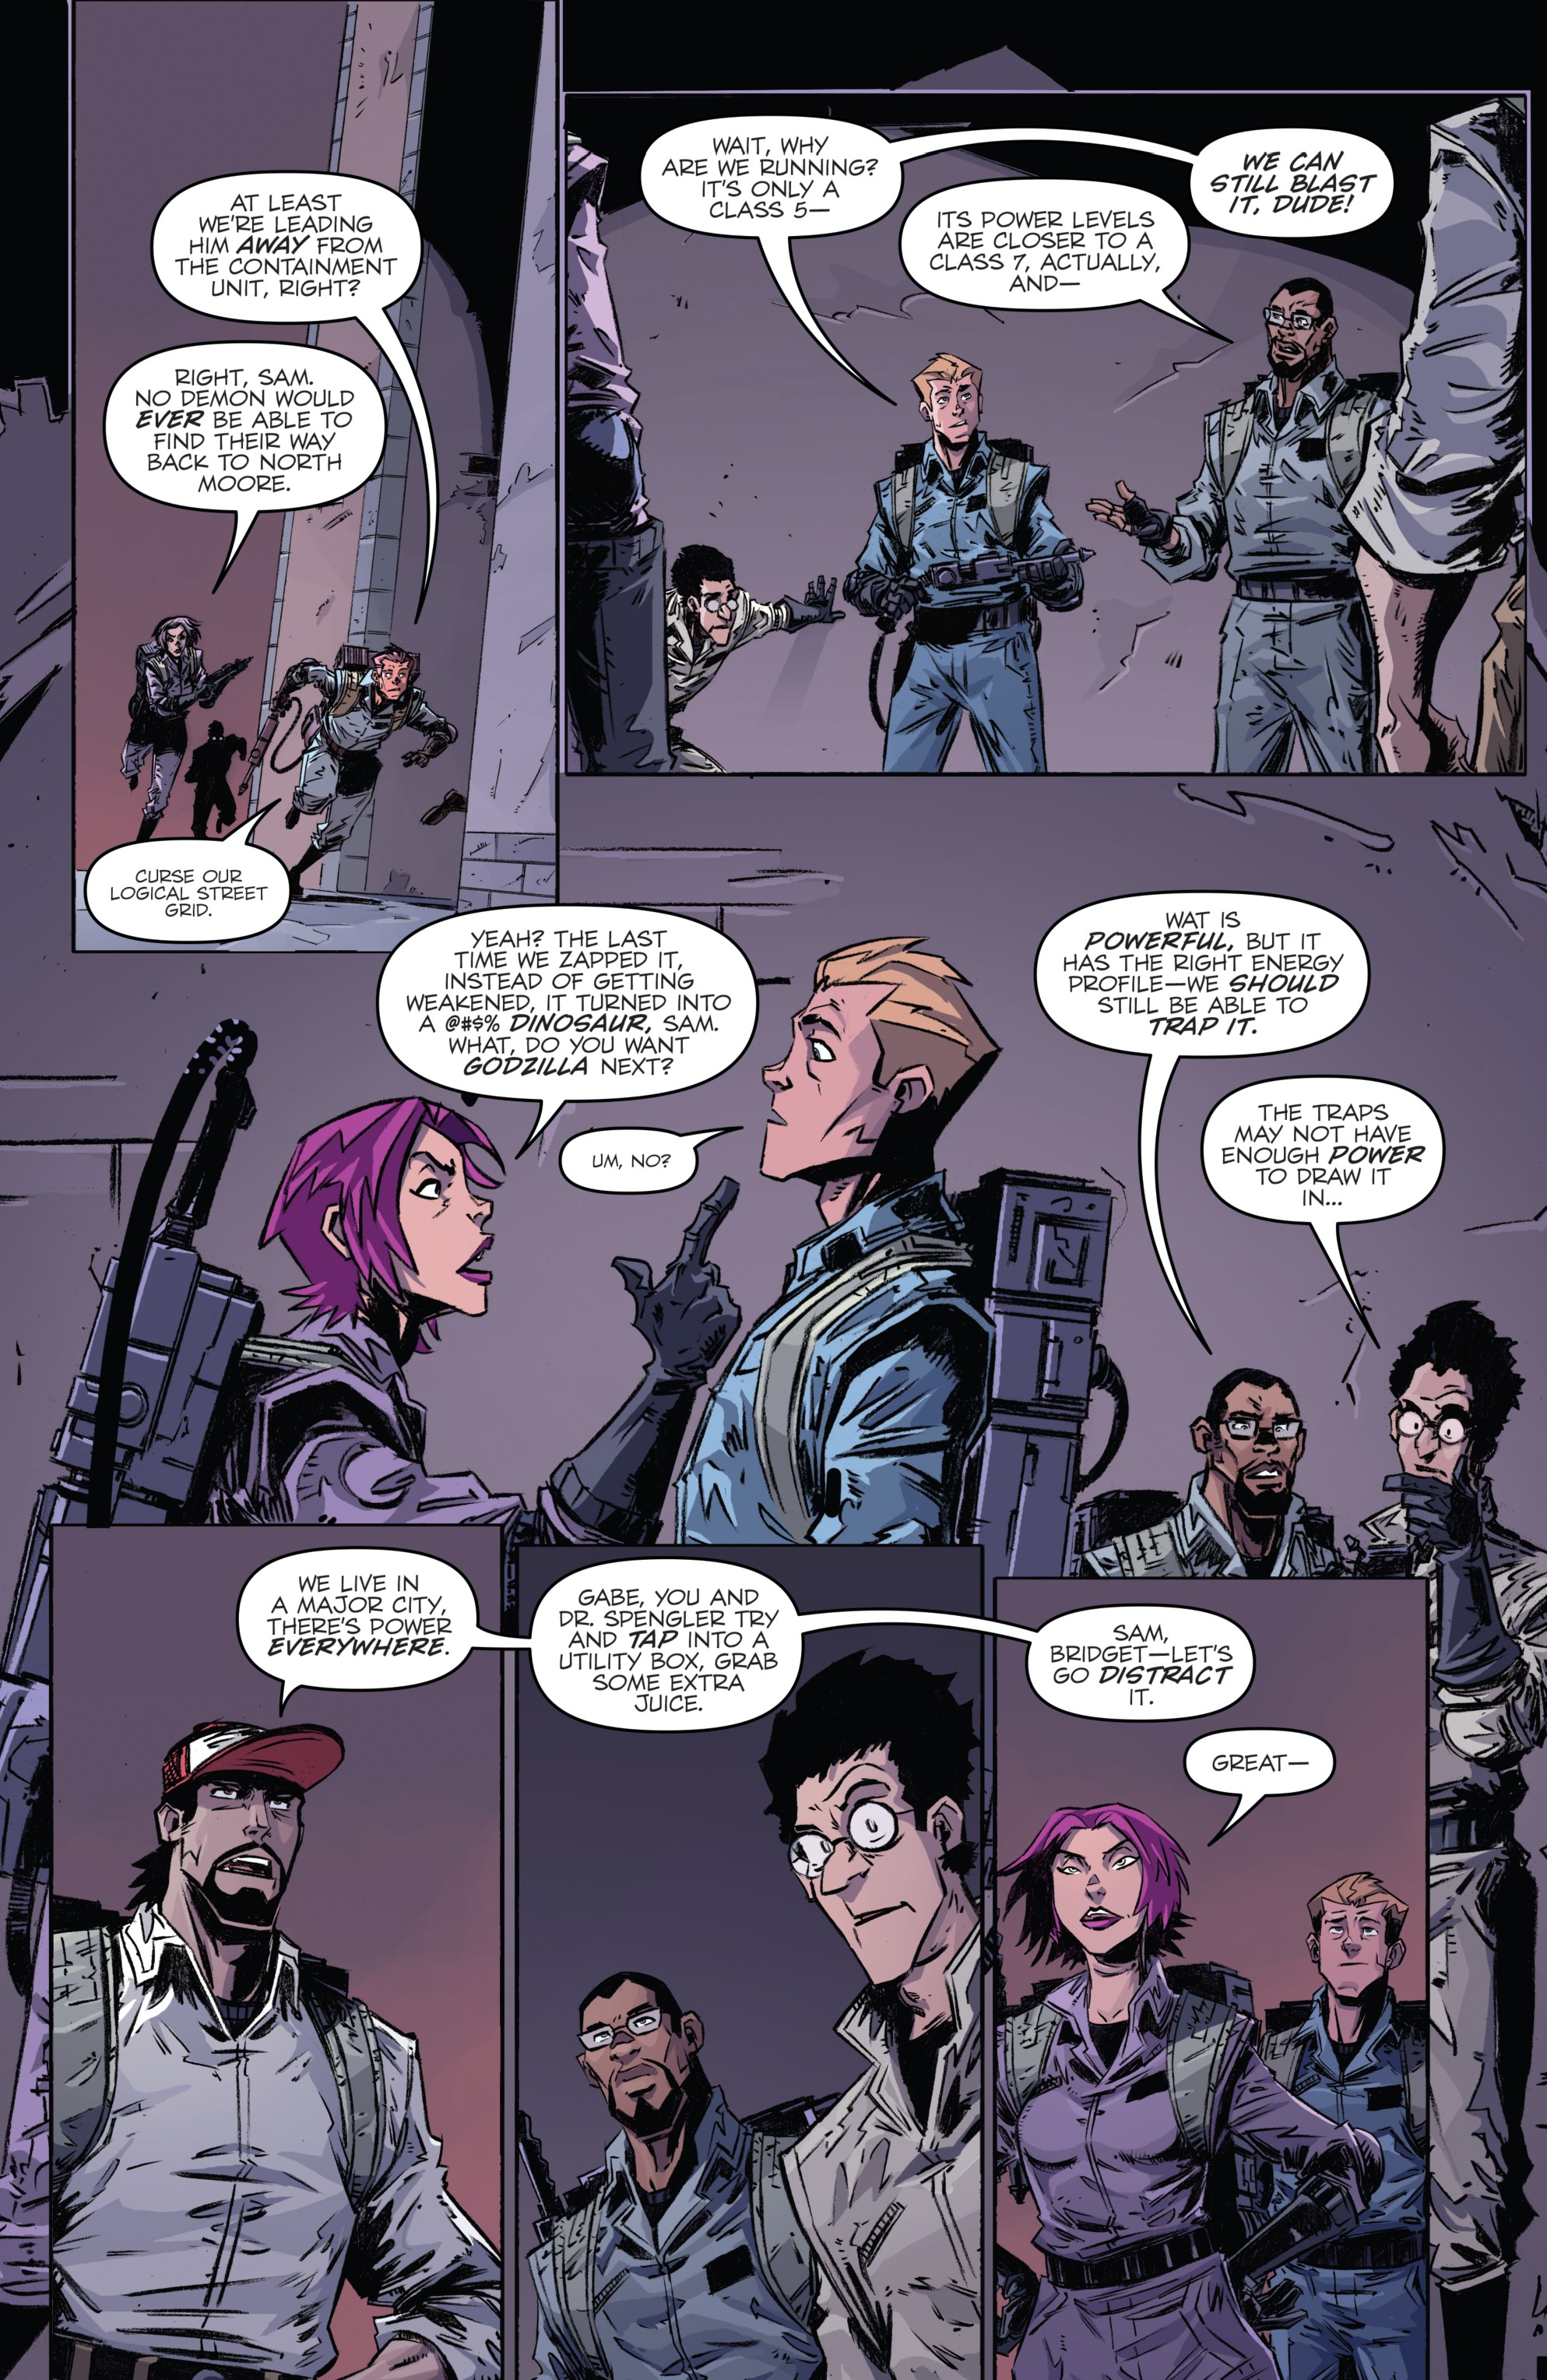 Ghostbusters Idw 20 20 2019 Chapter 1 Page 19